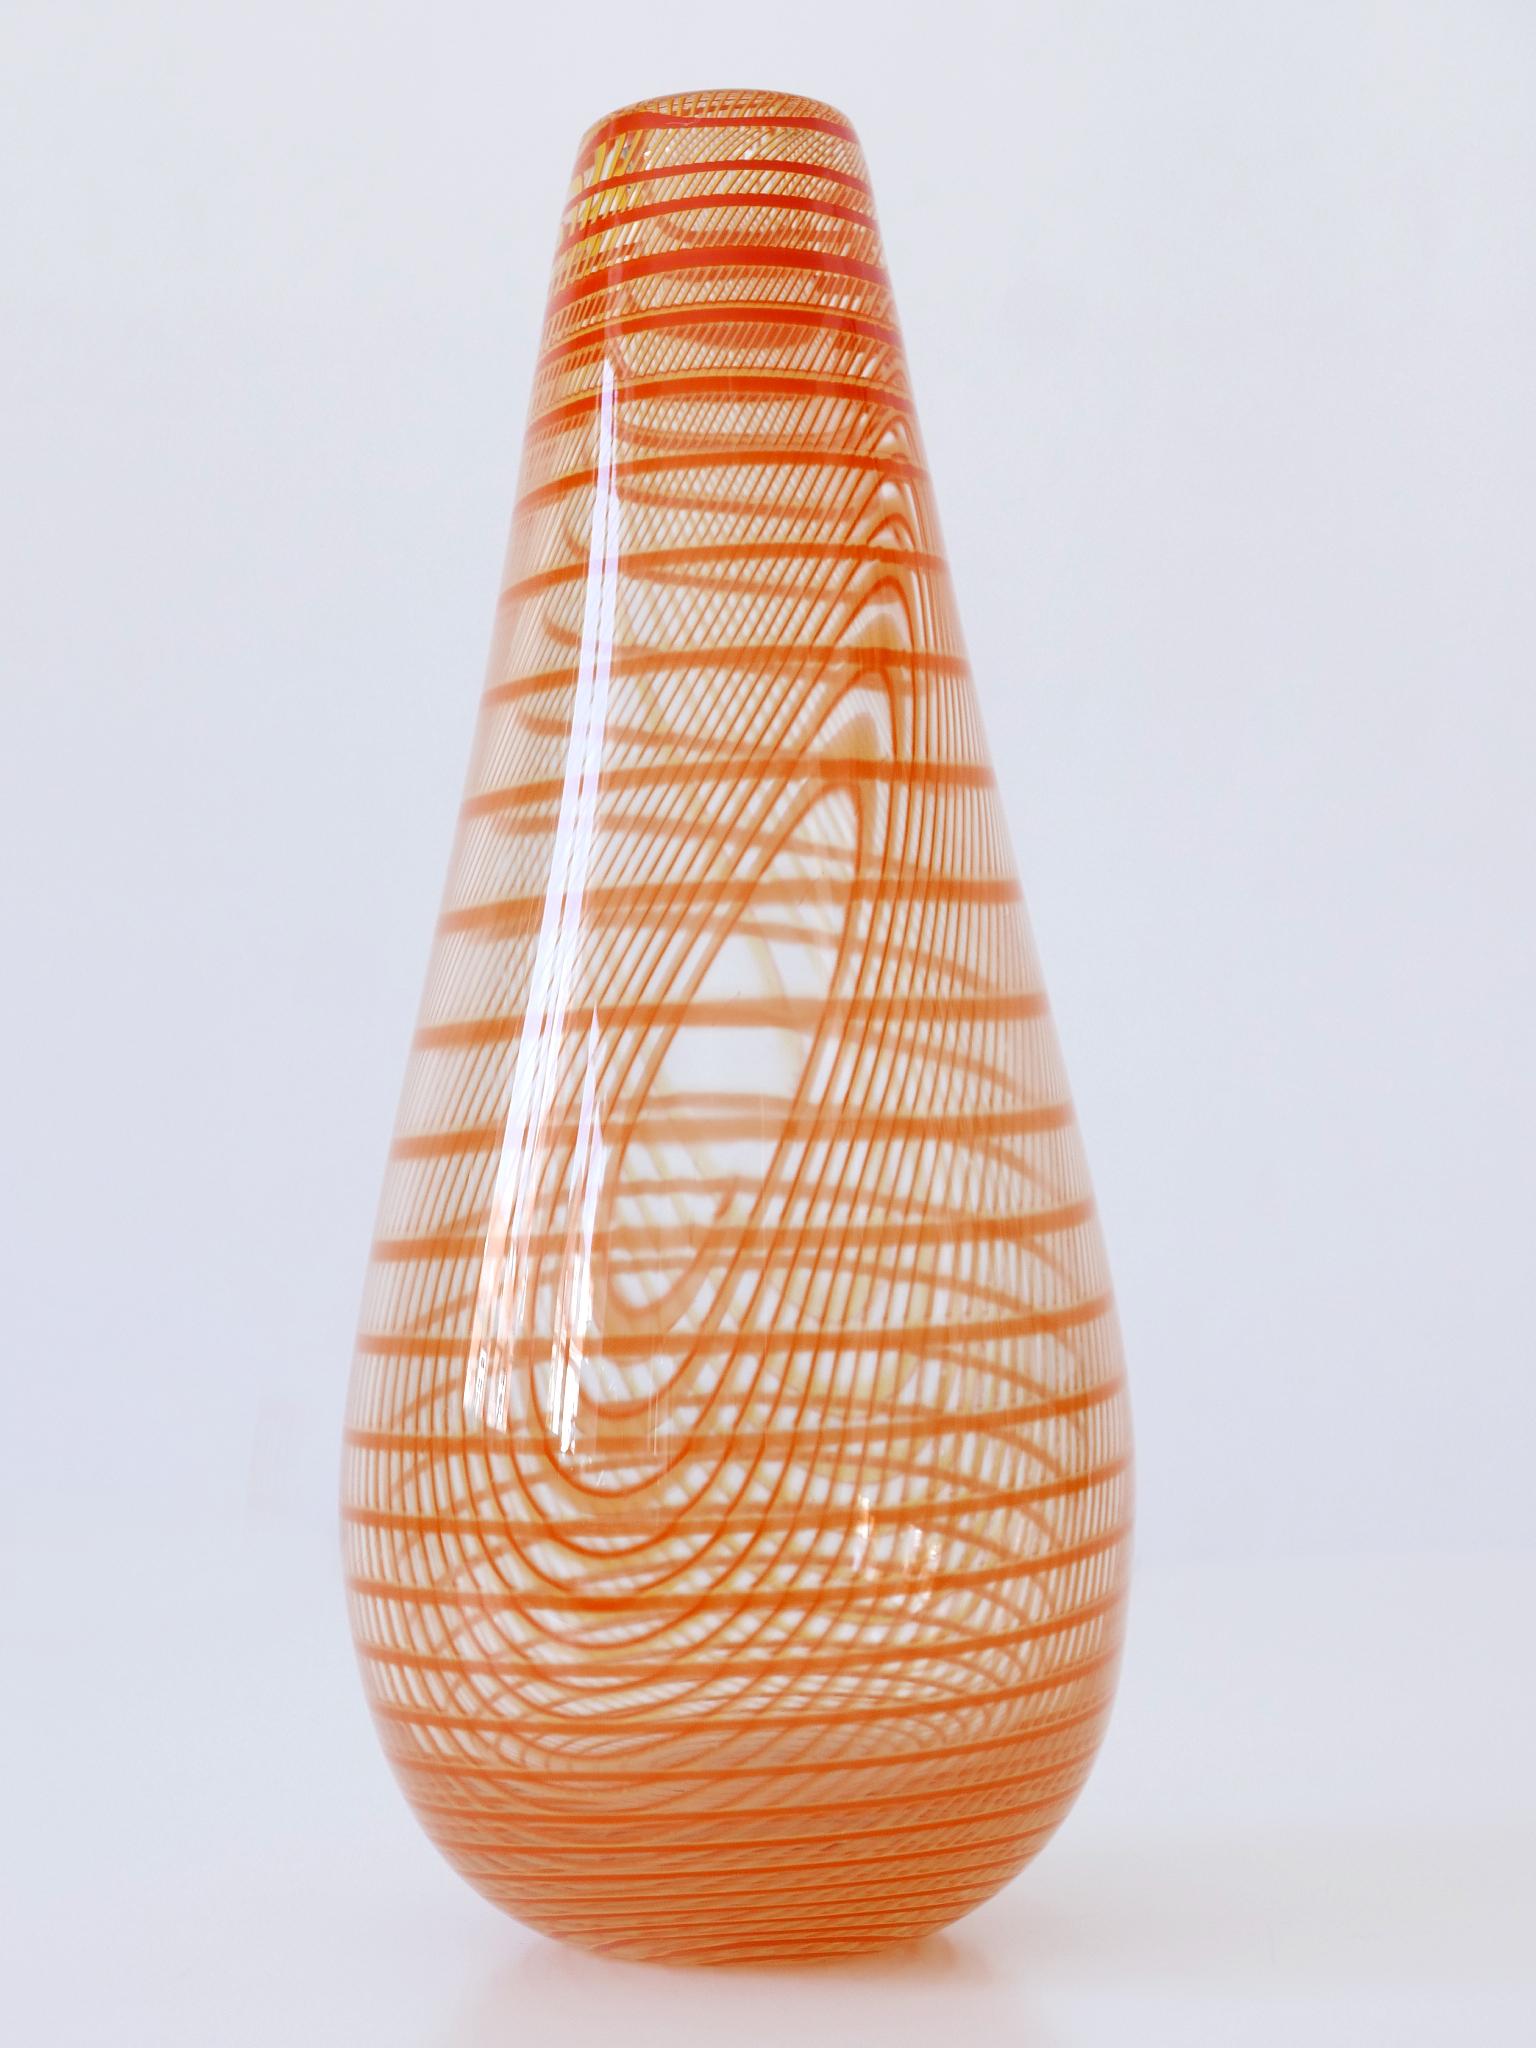 Tall, elegant and highly decorative art glass vase with stripes. Designed by Olle Brozén for Kosta Boda Sweden, 1980s. Signed at the bottom: Olle Brozén. 7341012. Kosta Boda. Lim. Ed. 100

Executed in thick art glass with stripes.

Dimensions:
H